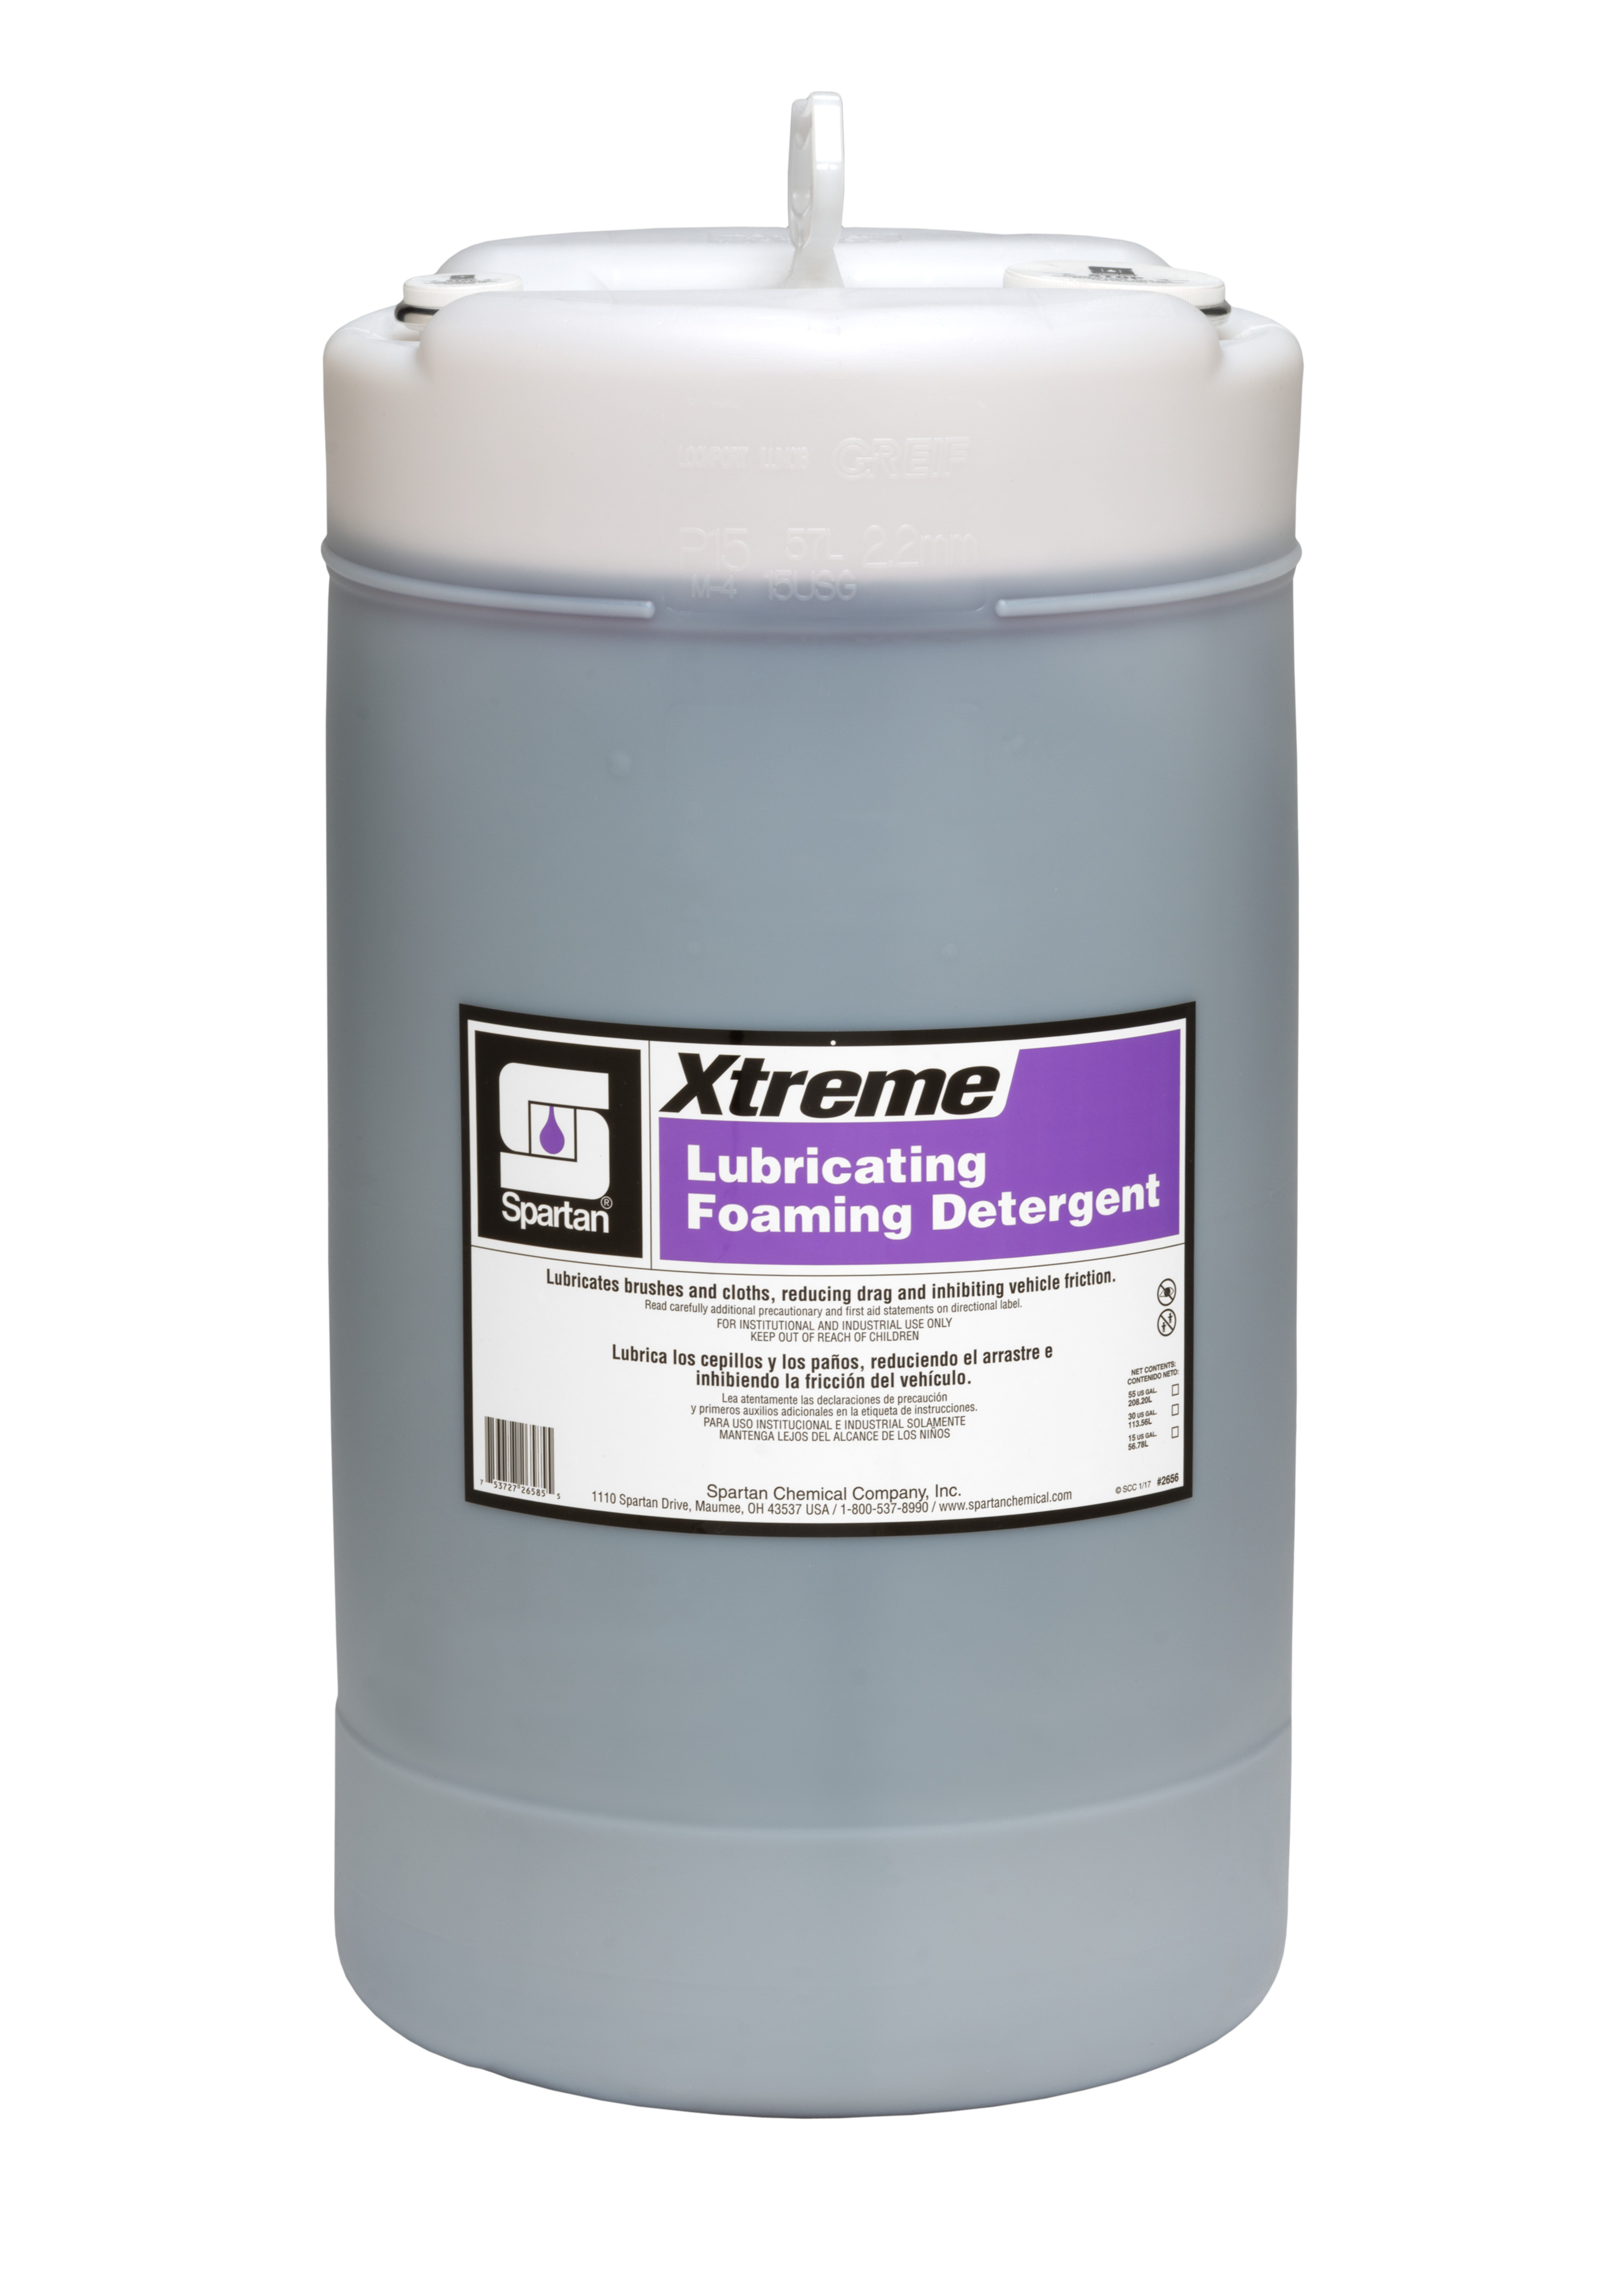 Spartan Chemical Company Xtreme Lubricating Foaming Detergent, 15 GAL DRUM